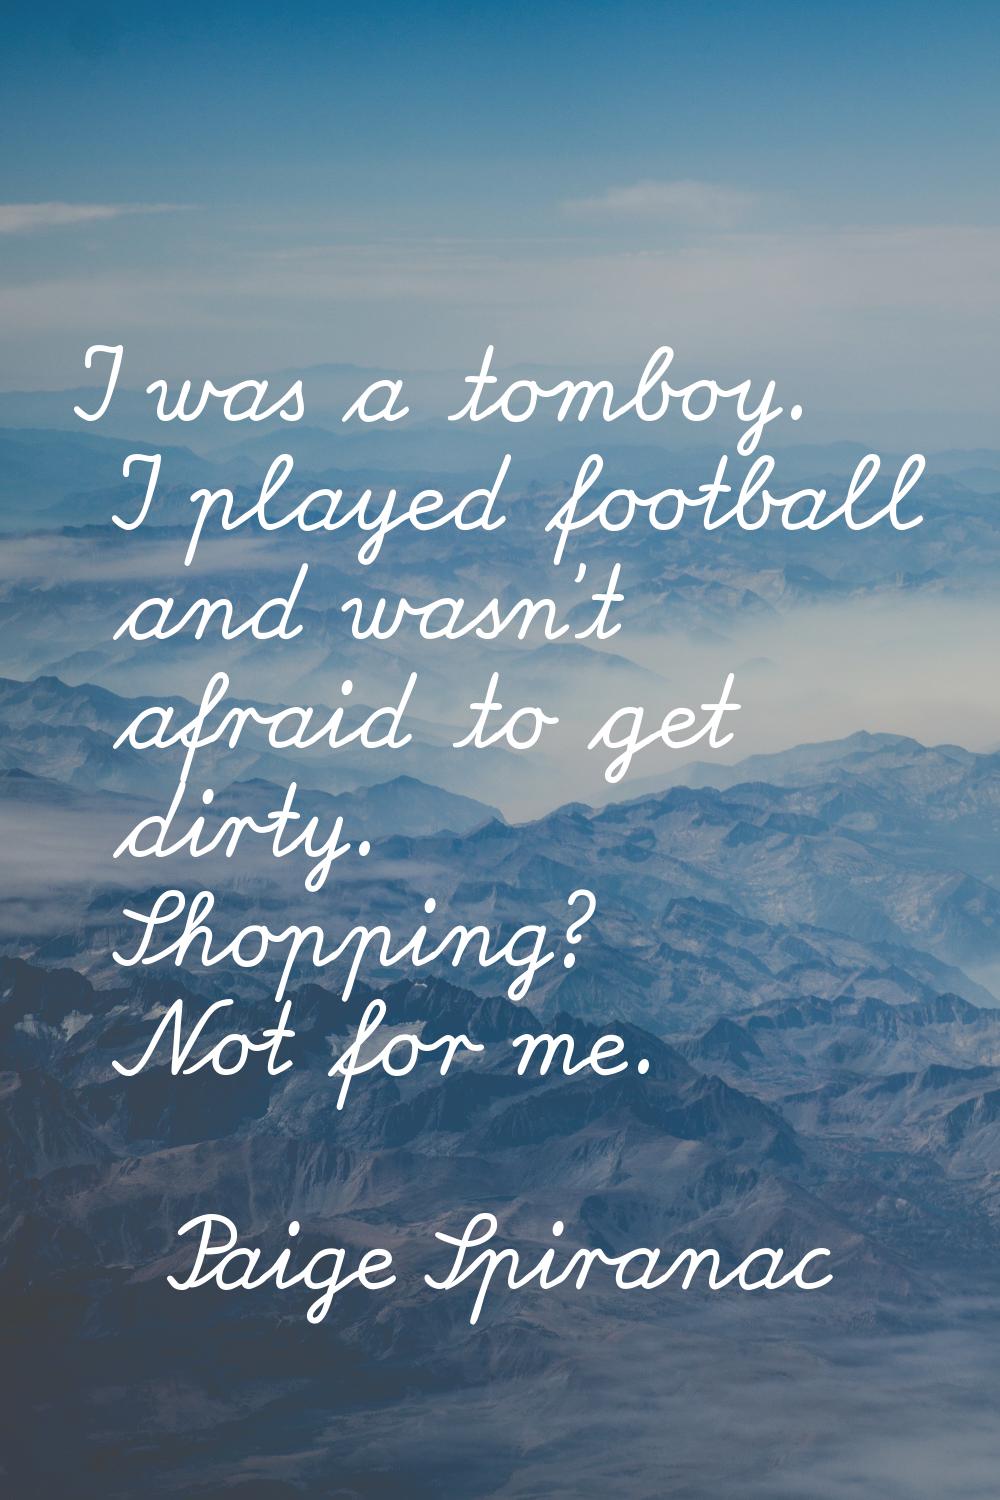 I was a tomboy. I played football and wasn't afraid to get dirty. Shopping? Not for me.